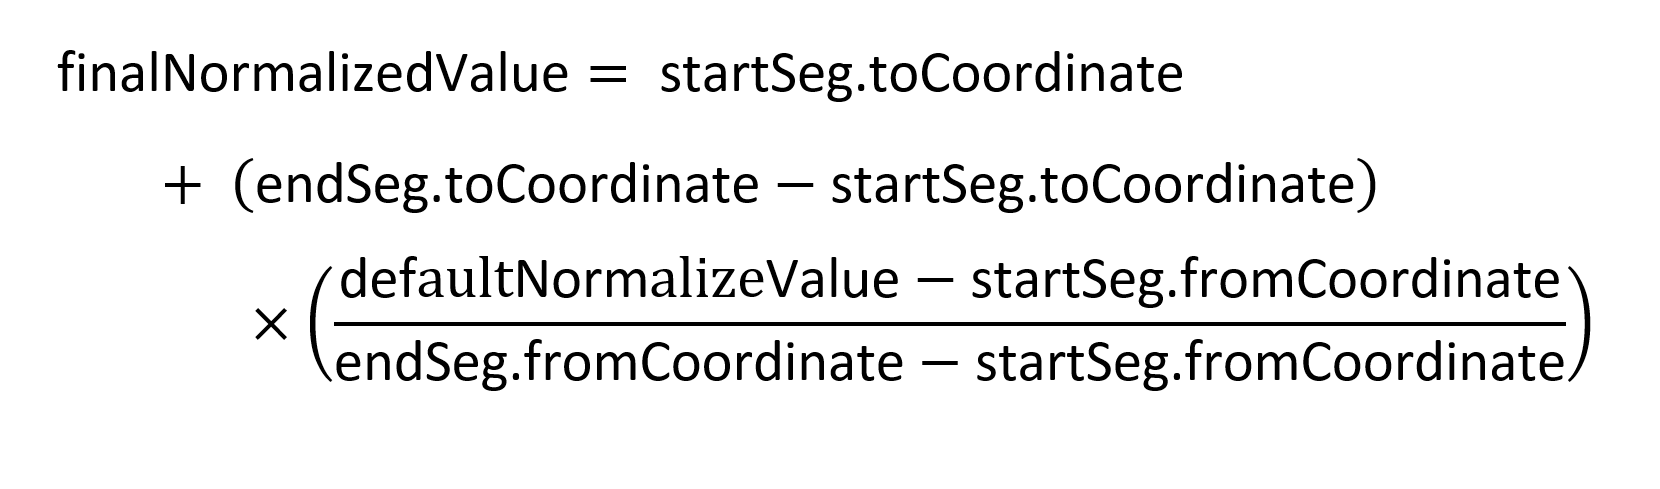 Screenshot that shows the equation to compute the final modified normalized value.